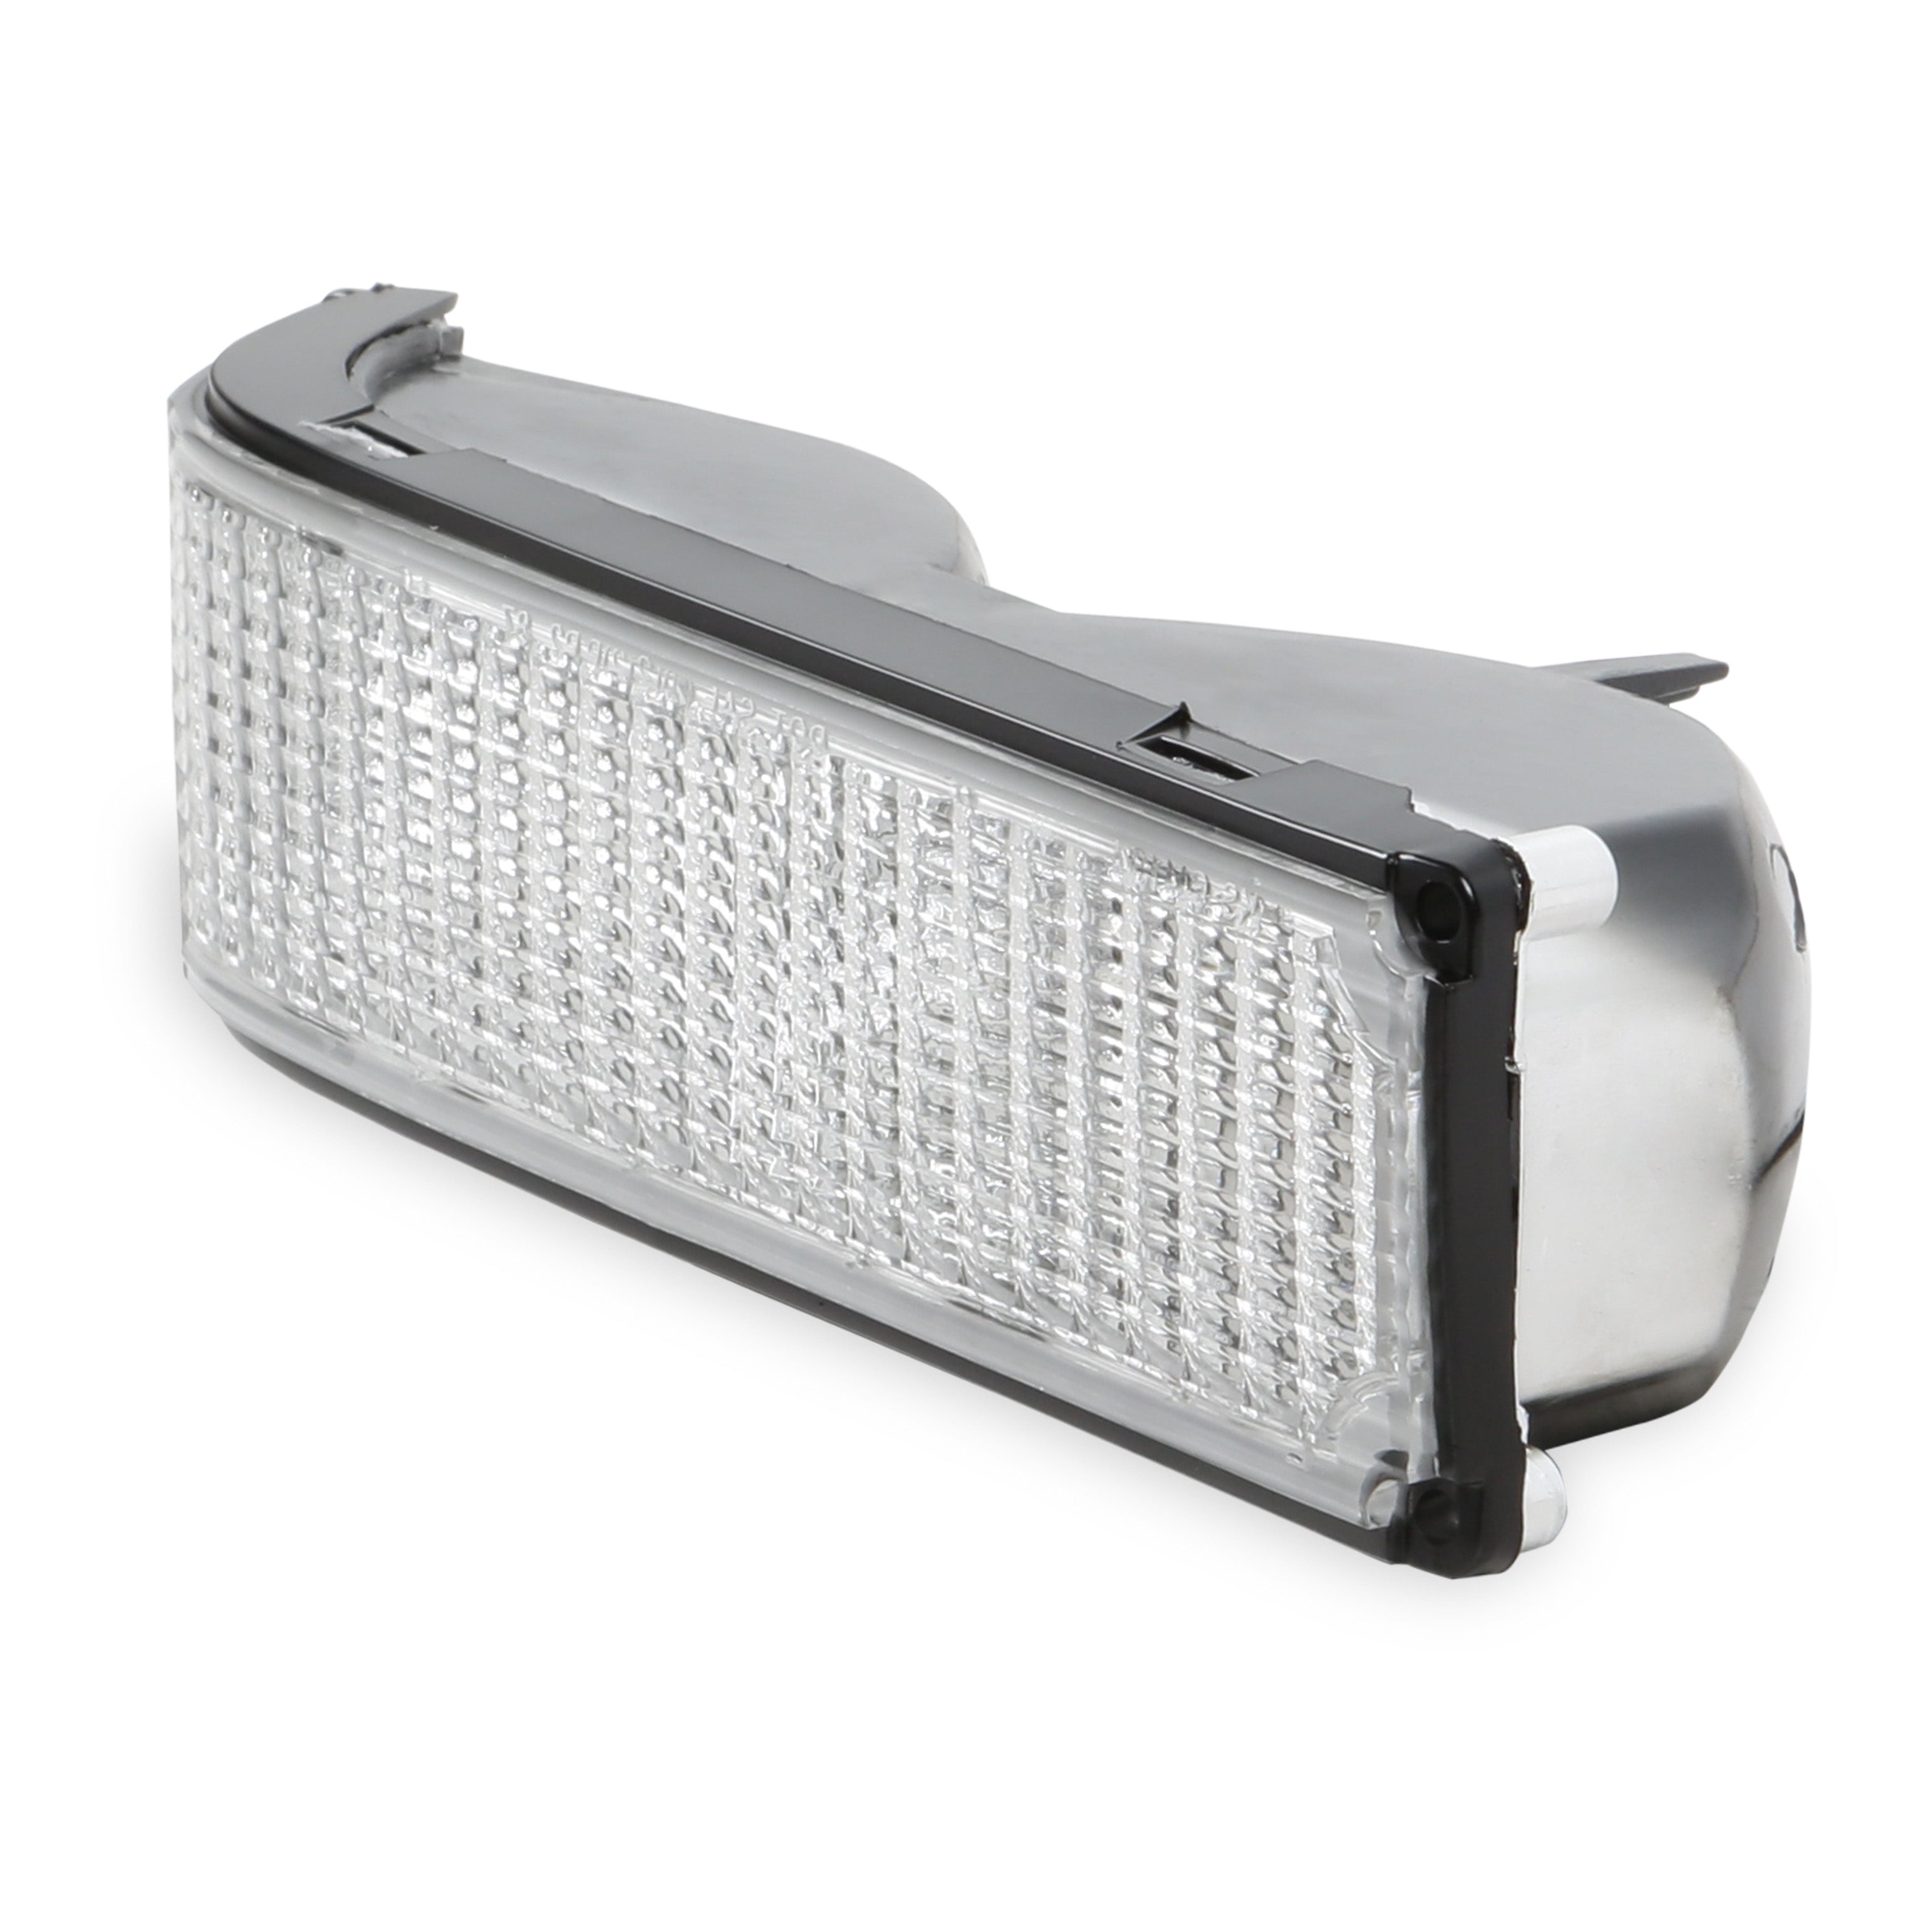 BROTHERS GMT400 Dual Headlight Parking Lamp - Clear - RH pn 07-118